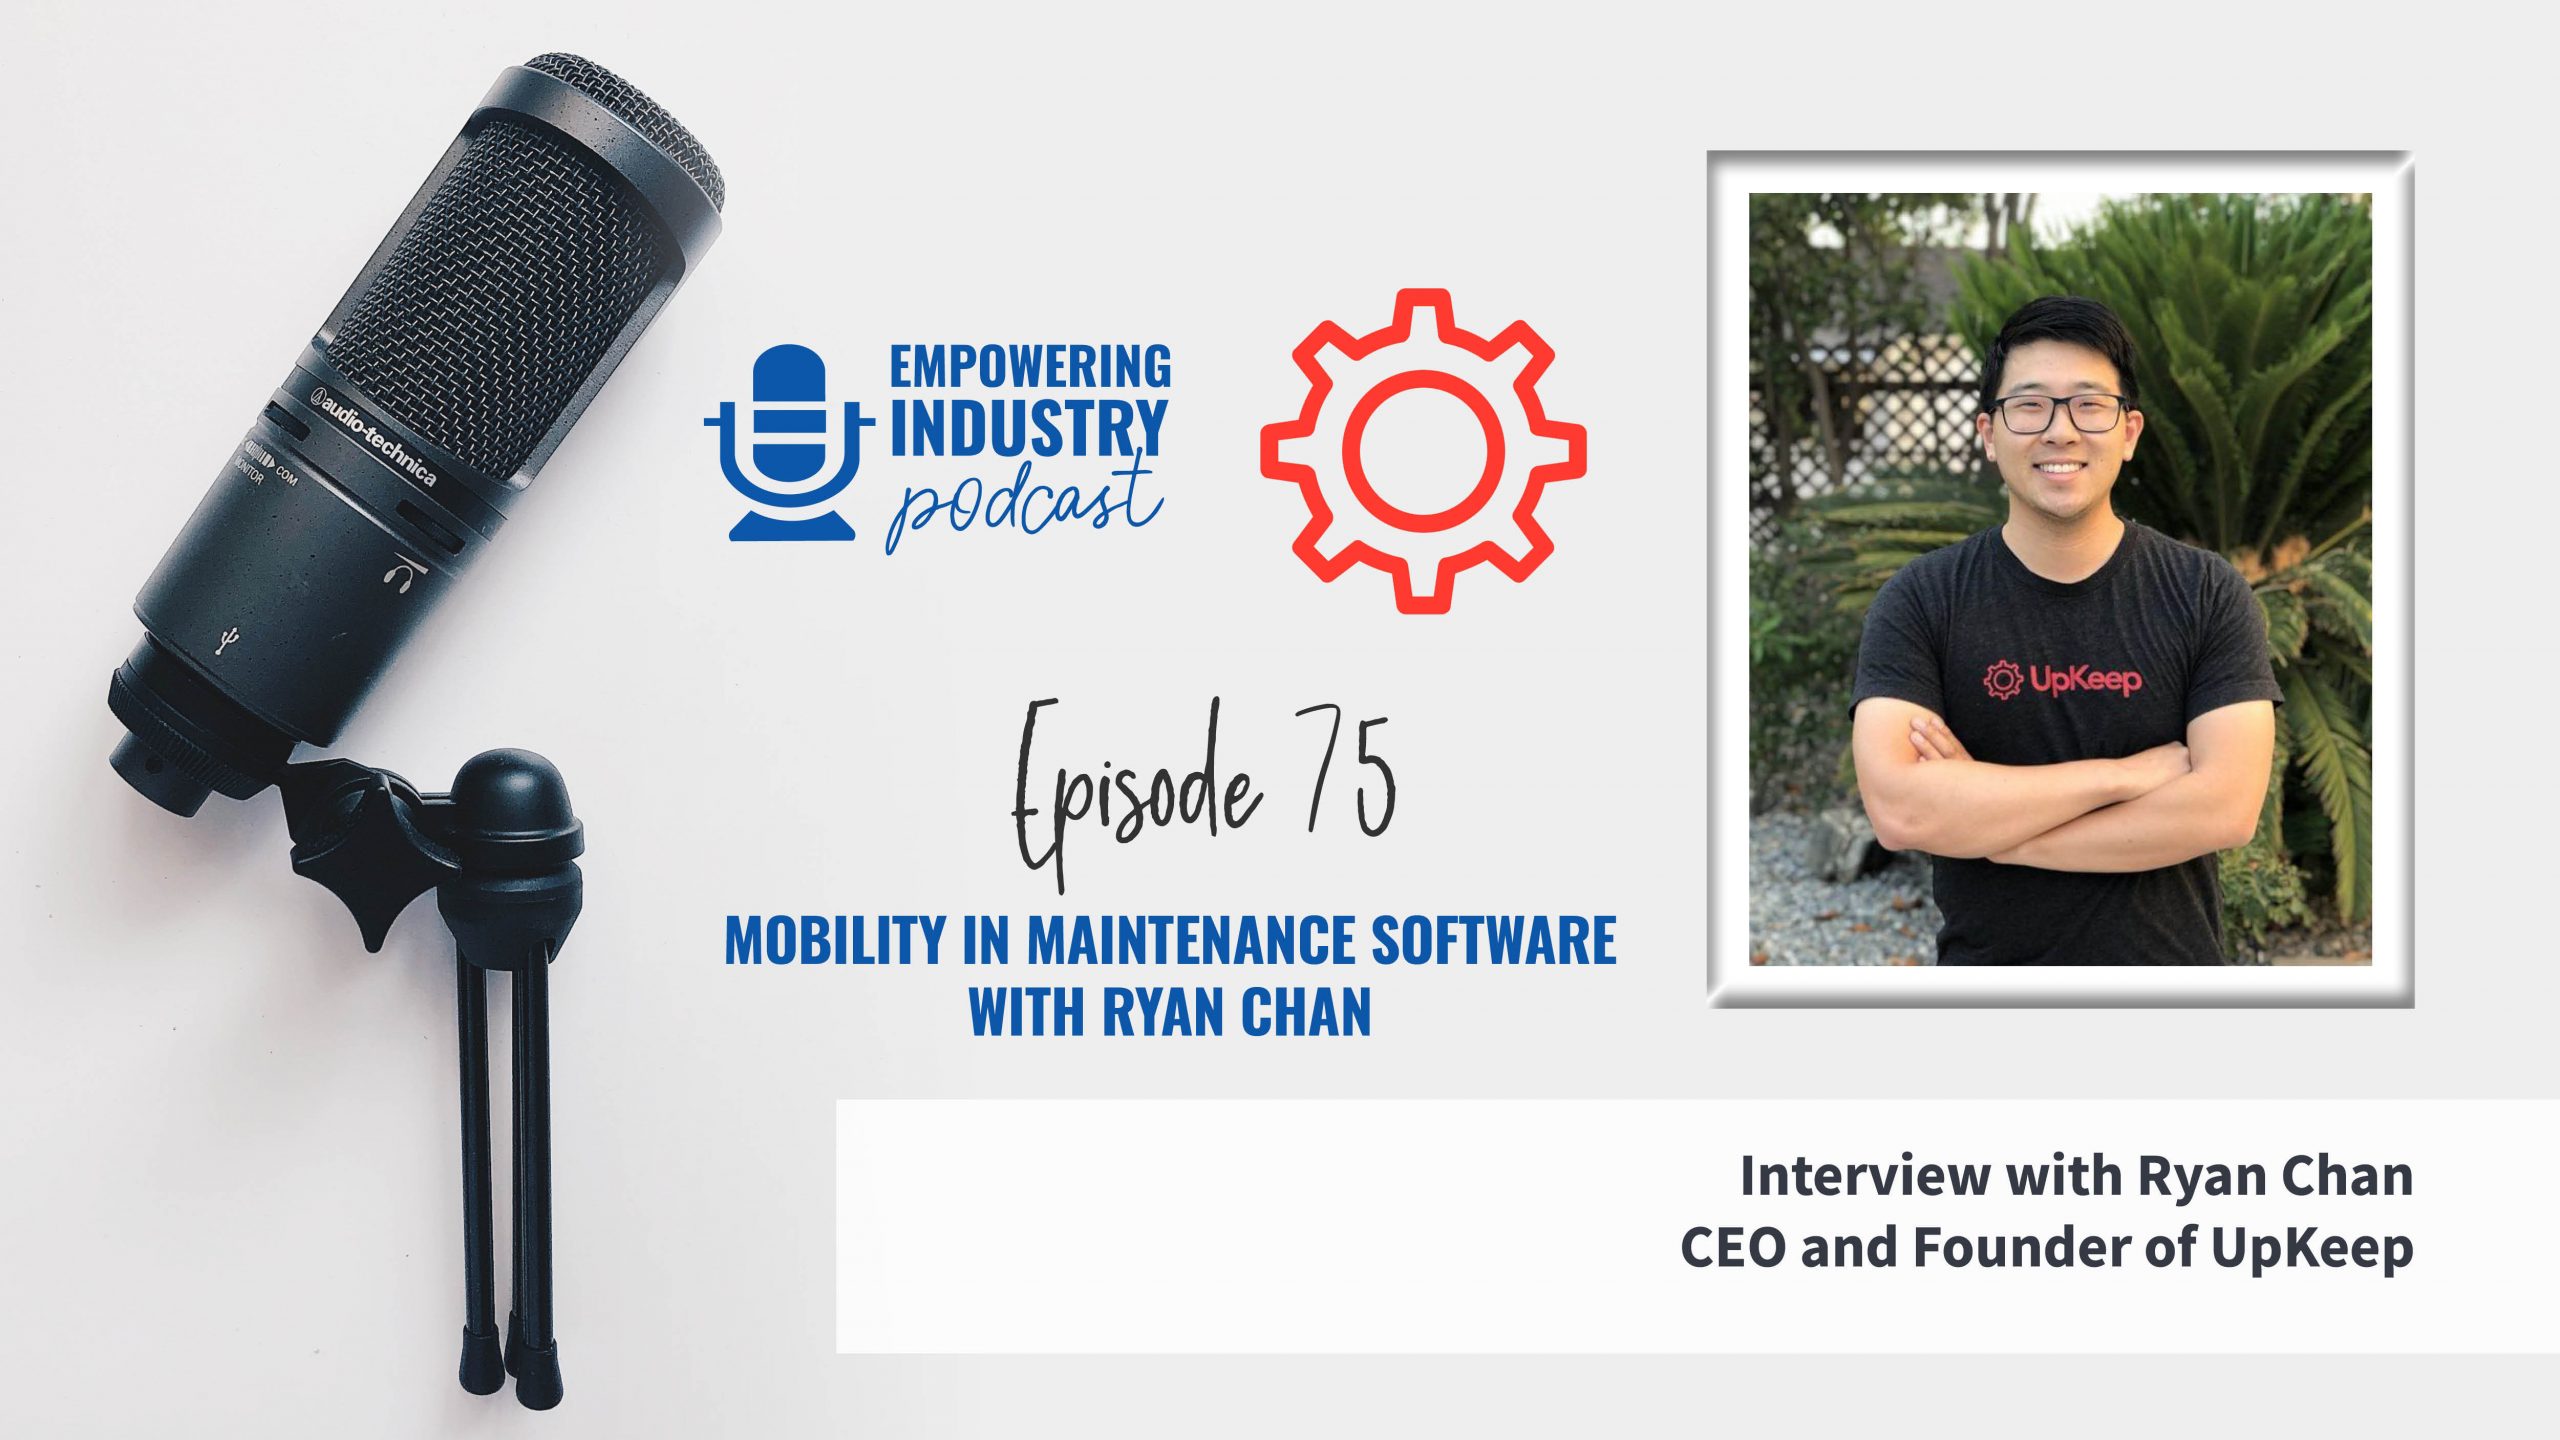 Mobility in Maintenance Software with Ryan Chan